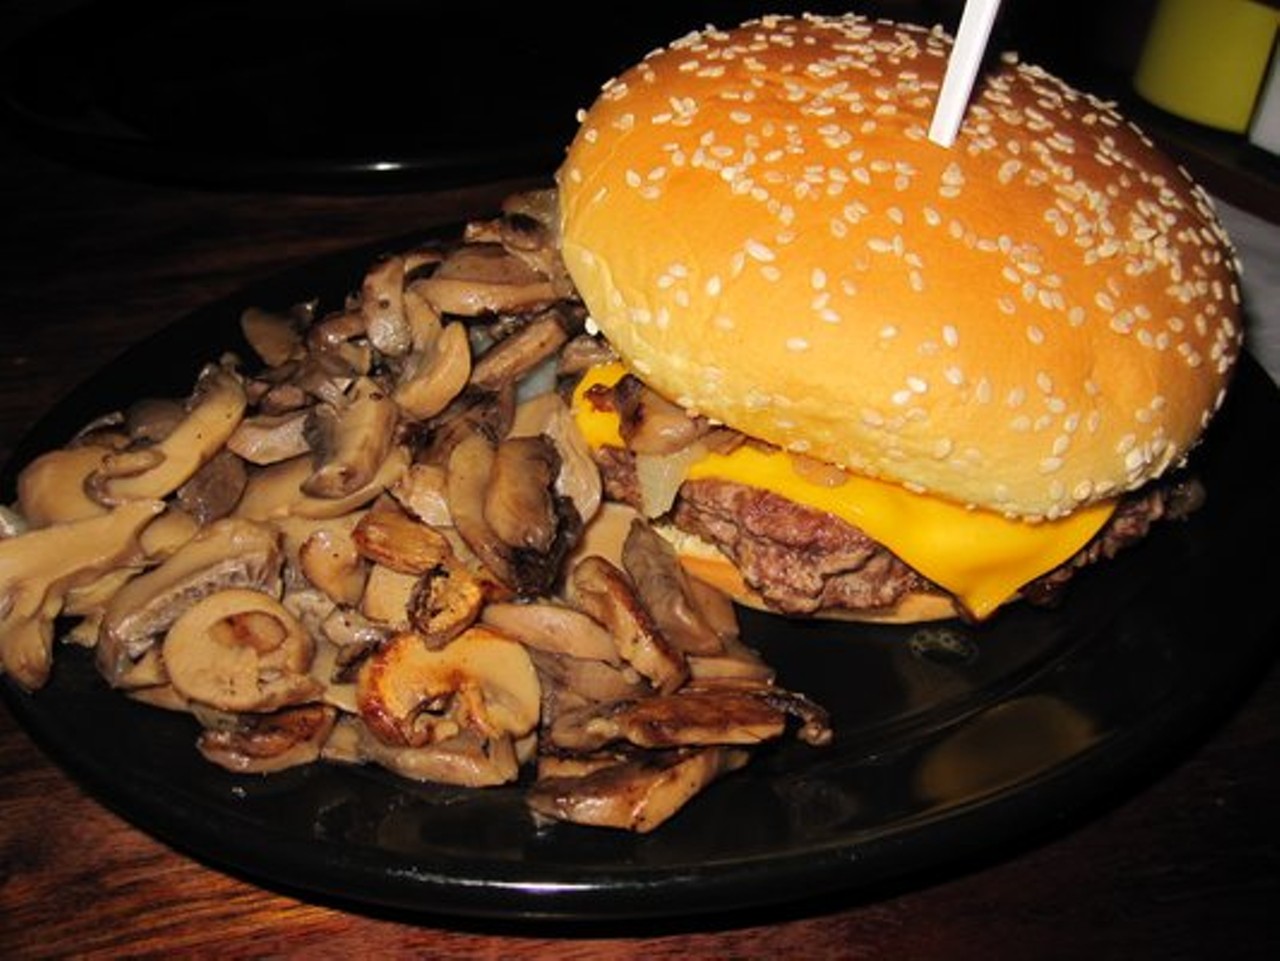 Whitey's Booze-N-Burgers is located at 3600 Brecksville Rd,  Richfield, OH. Call (330)659-3600 for more information.